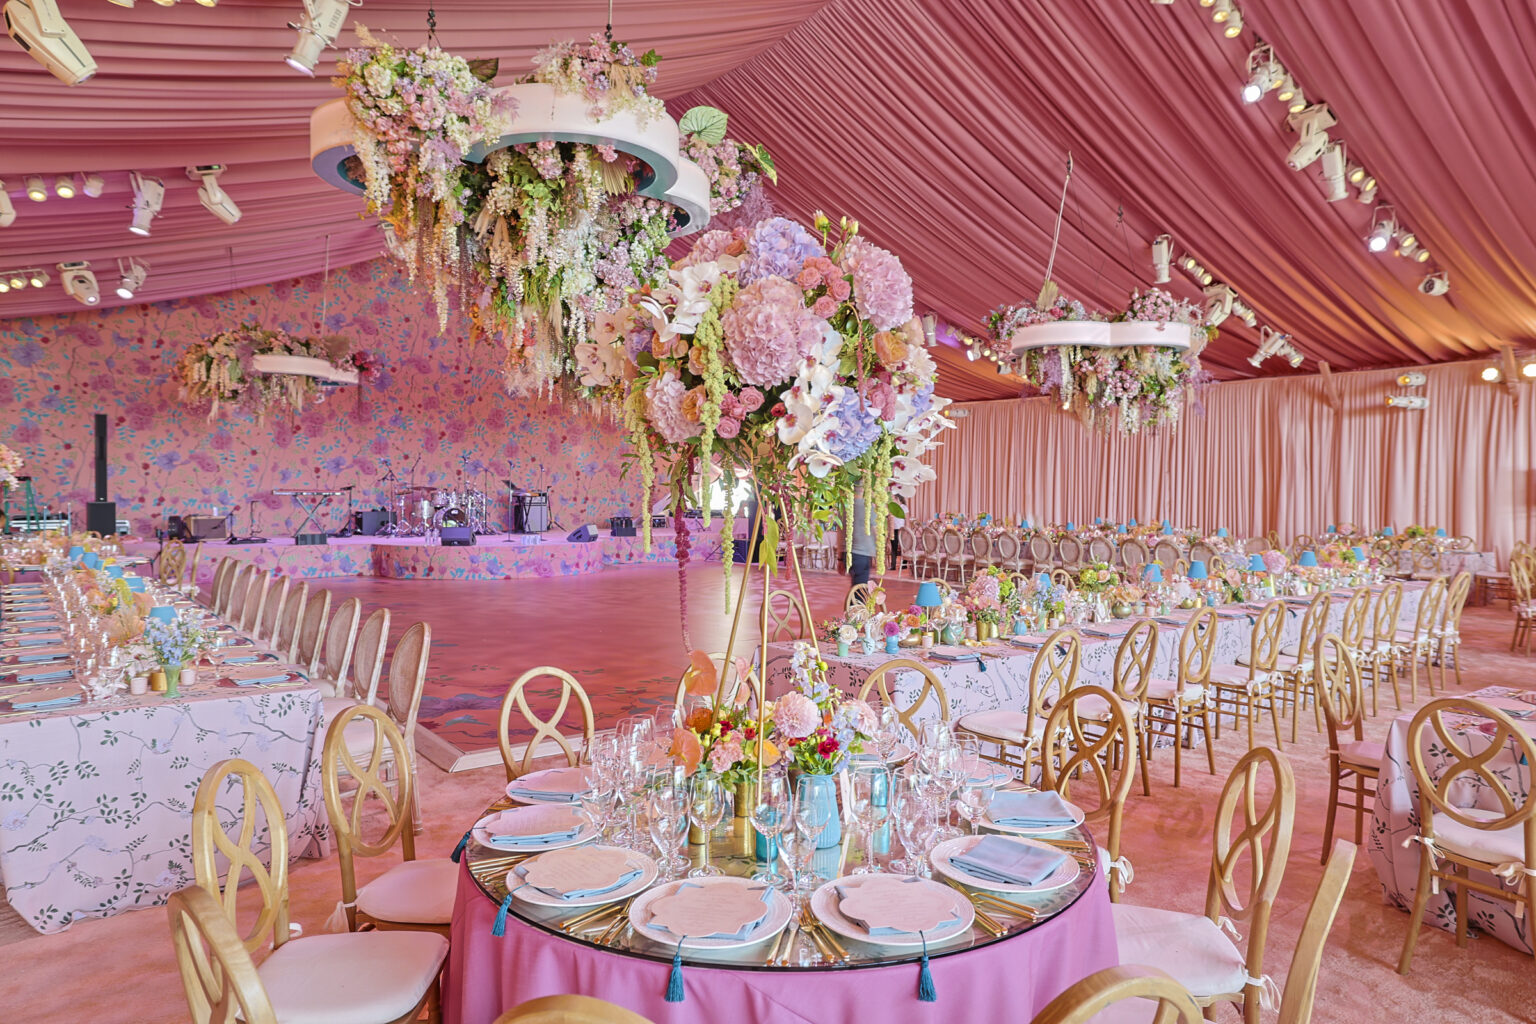 Extravagant wedding reception with draped pink tent ceilings and custom cascading floral chandelier. Designed by Rafanelli Events.